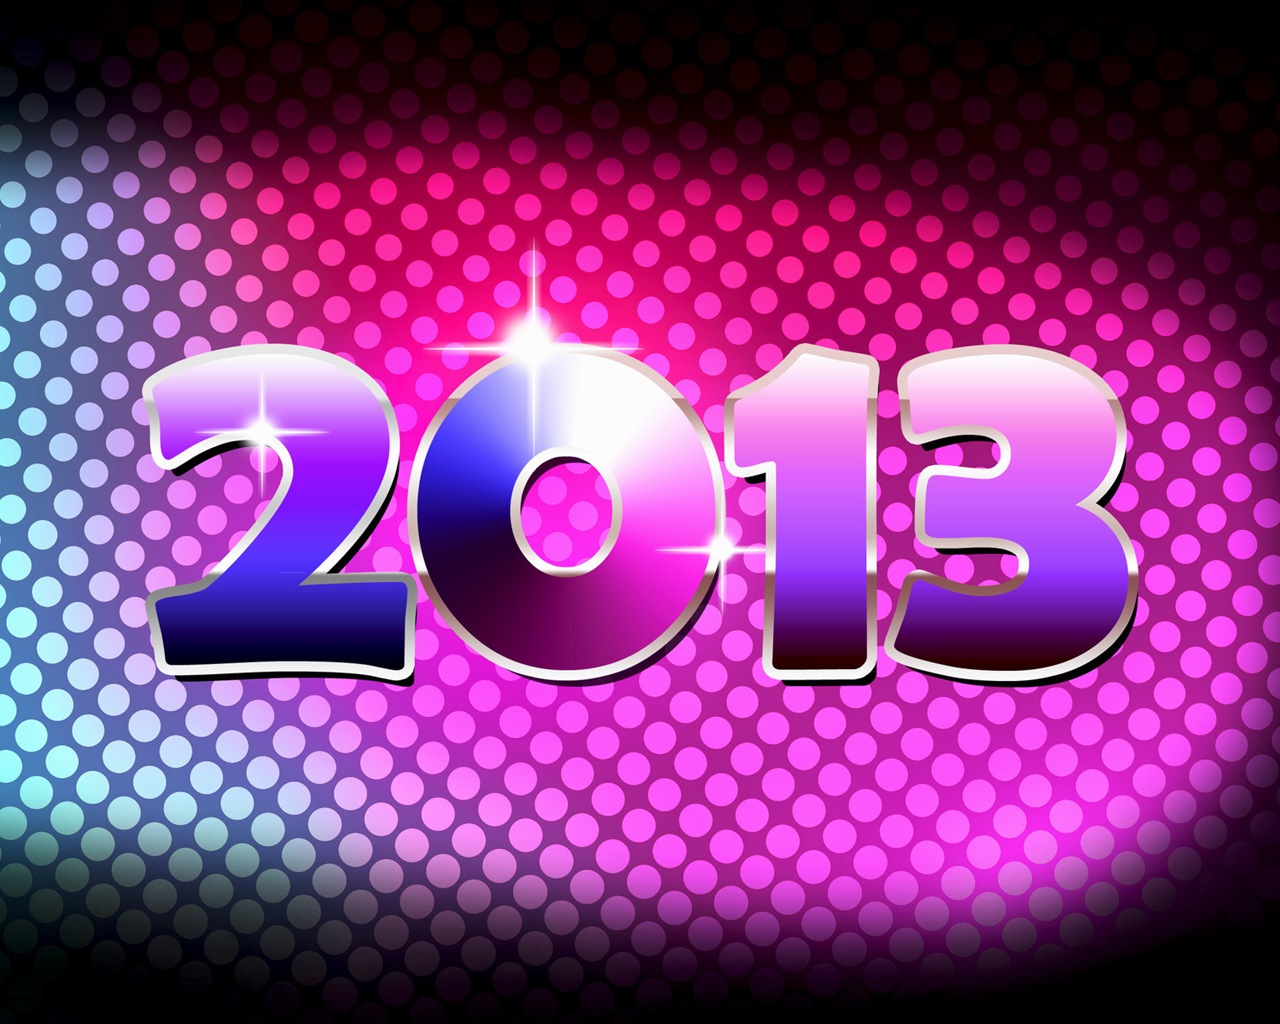 2013 Silvester Thema kreative Tapete (1) #9 - 1280x1024